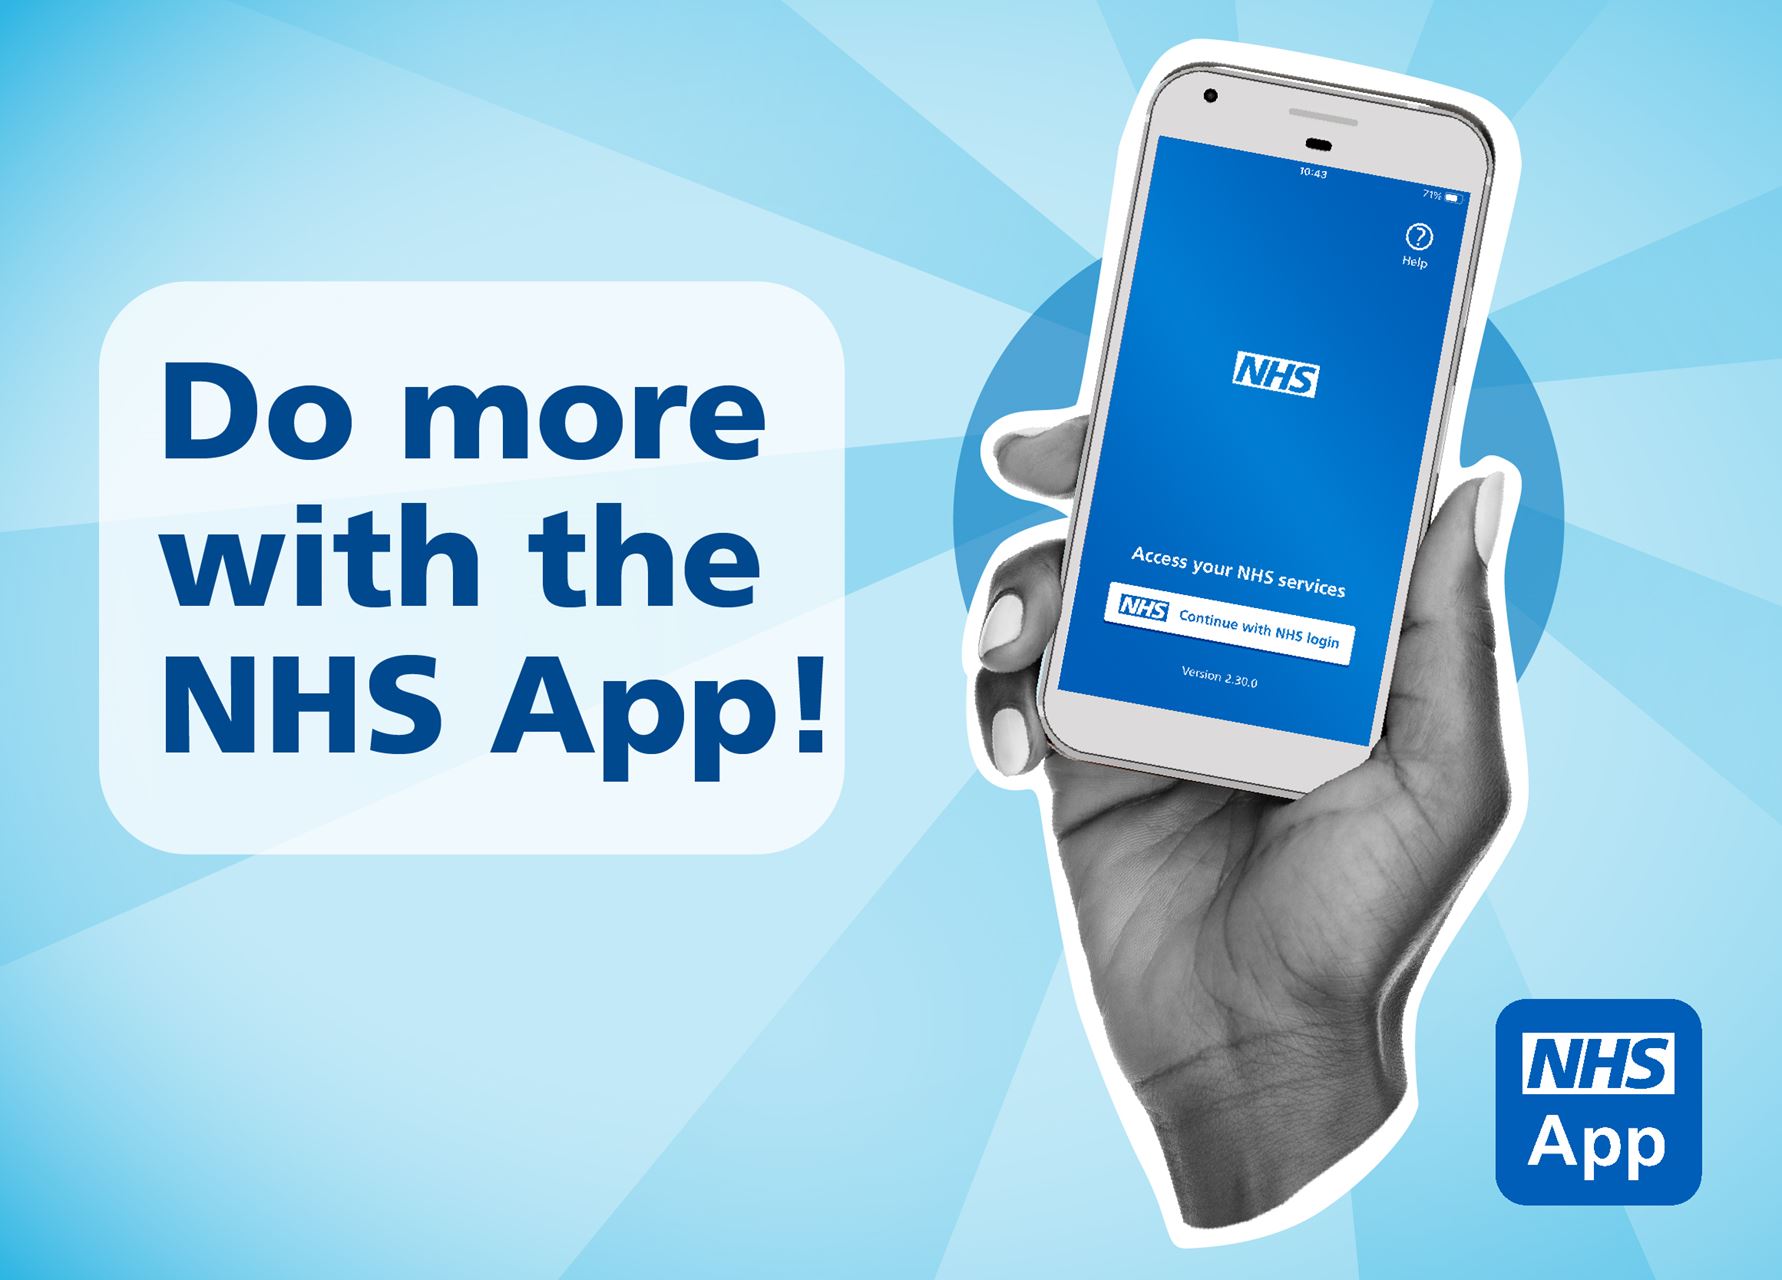 A hand holding a mobile phone with the NHS app open on screen